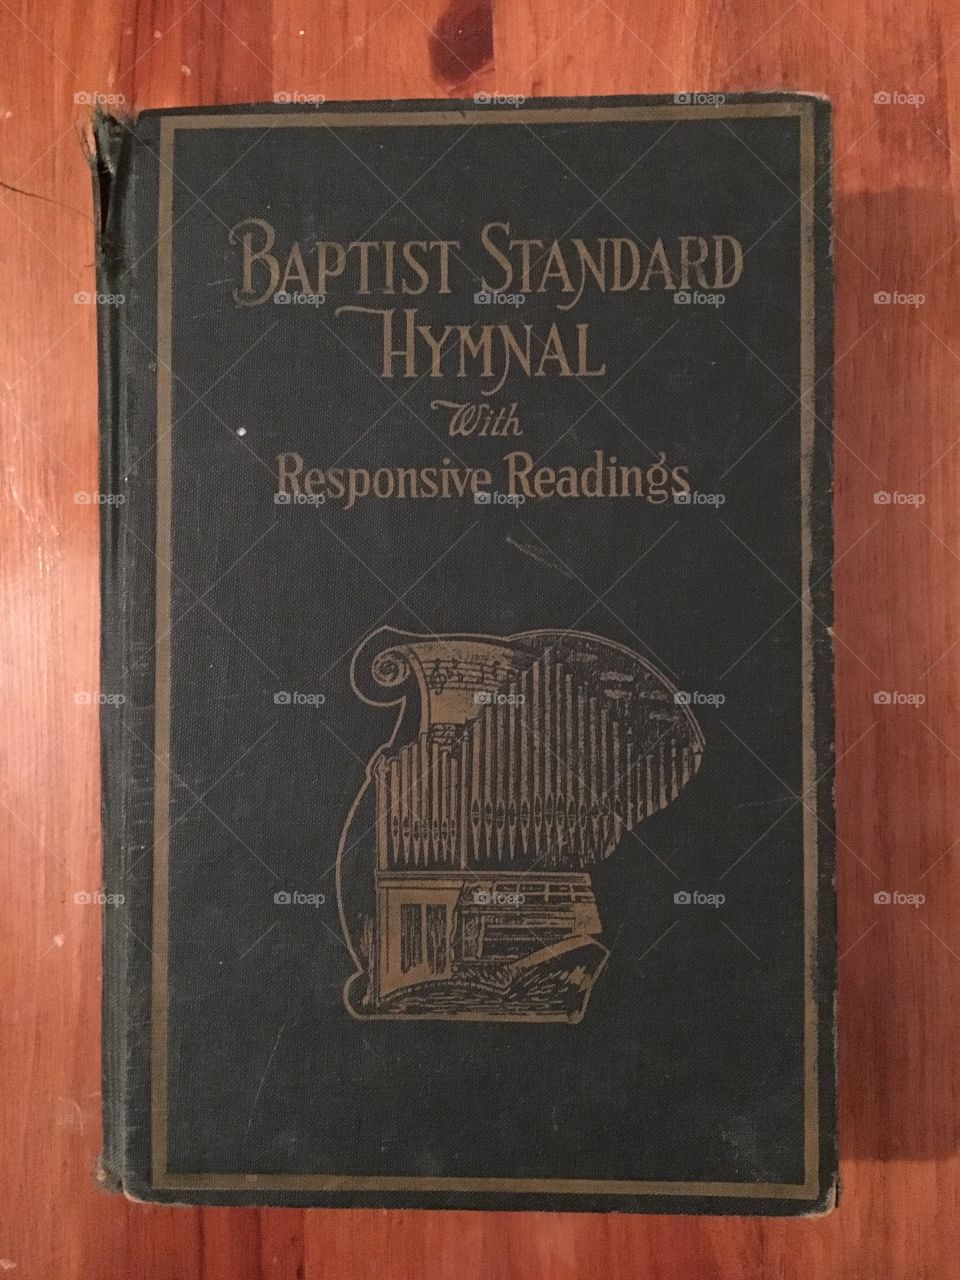 Baptist Standard Hymnal with Responsive Readings with a copyright of 1973 by the Sunday School Publishing Board. National Baptist Convention, USA, Inc. Printed in the USA by Townsend Press of Nashville, TN. 